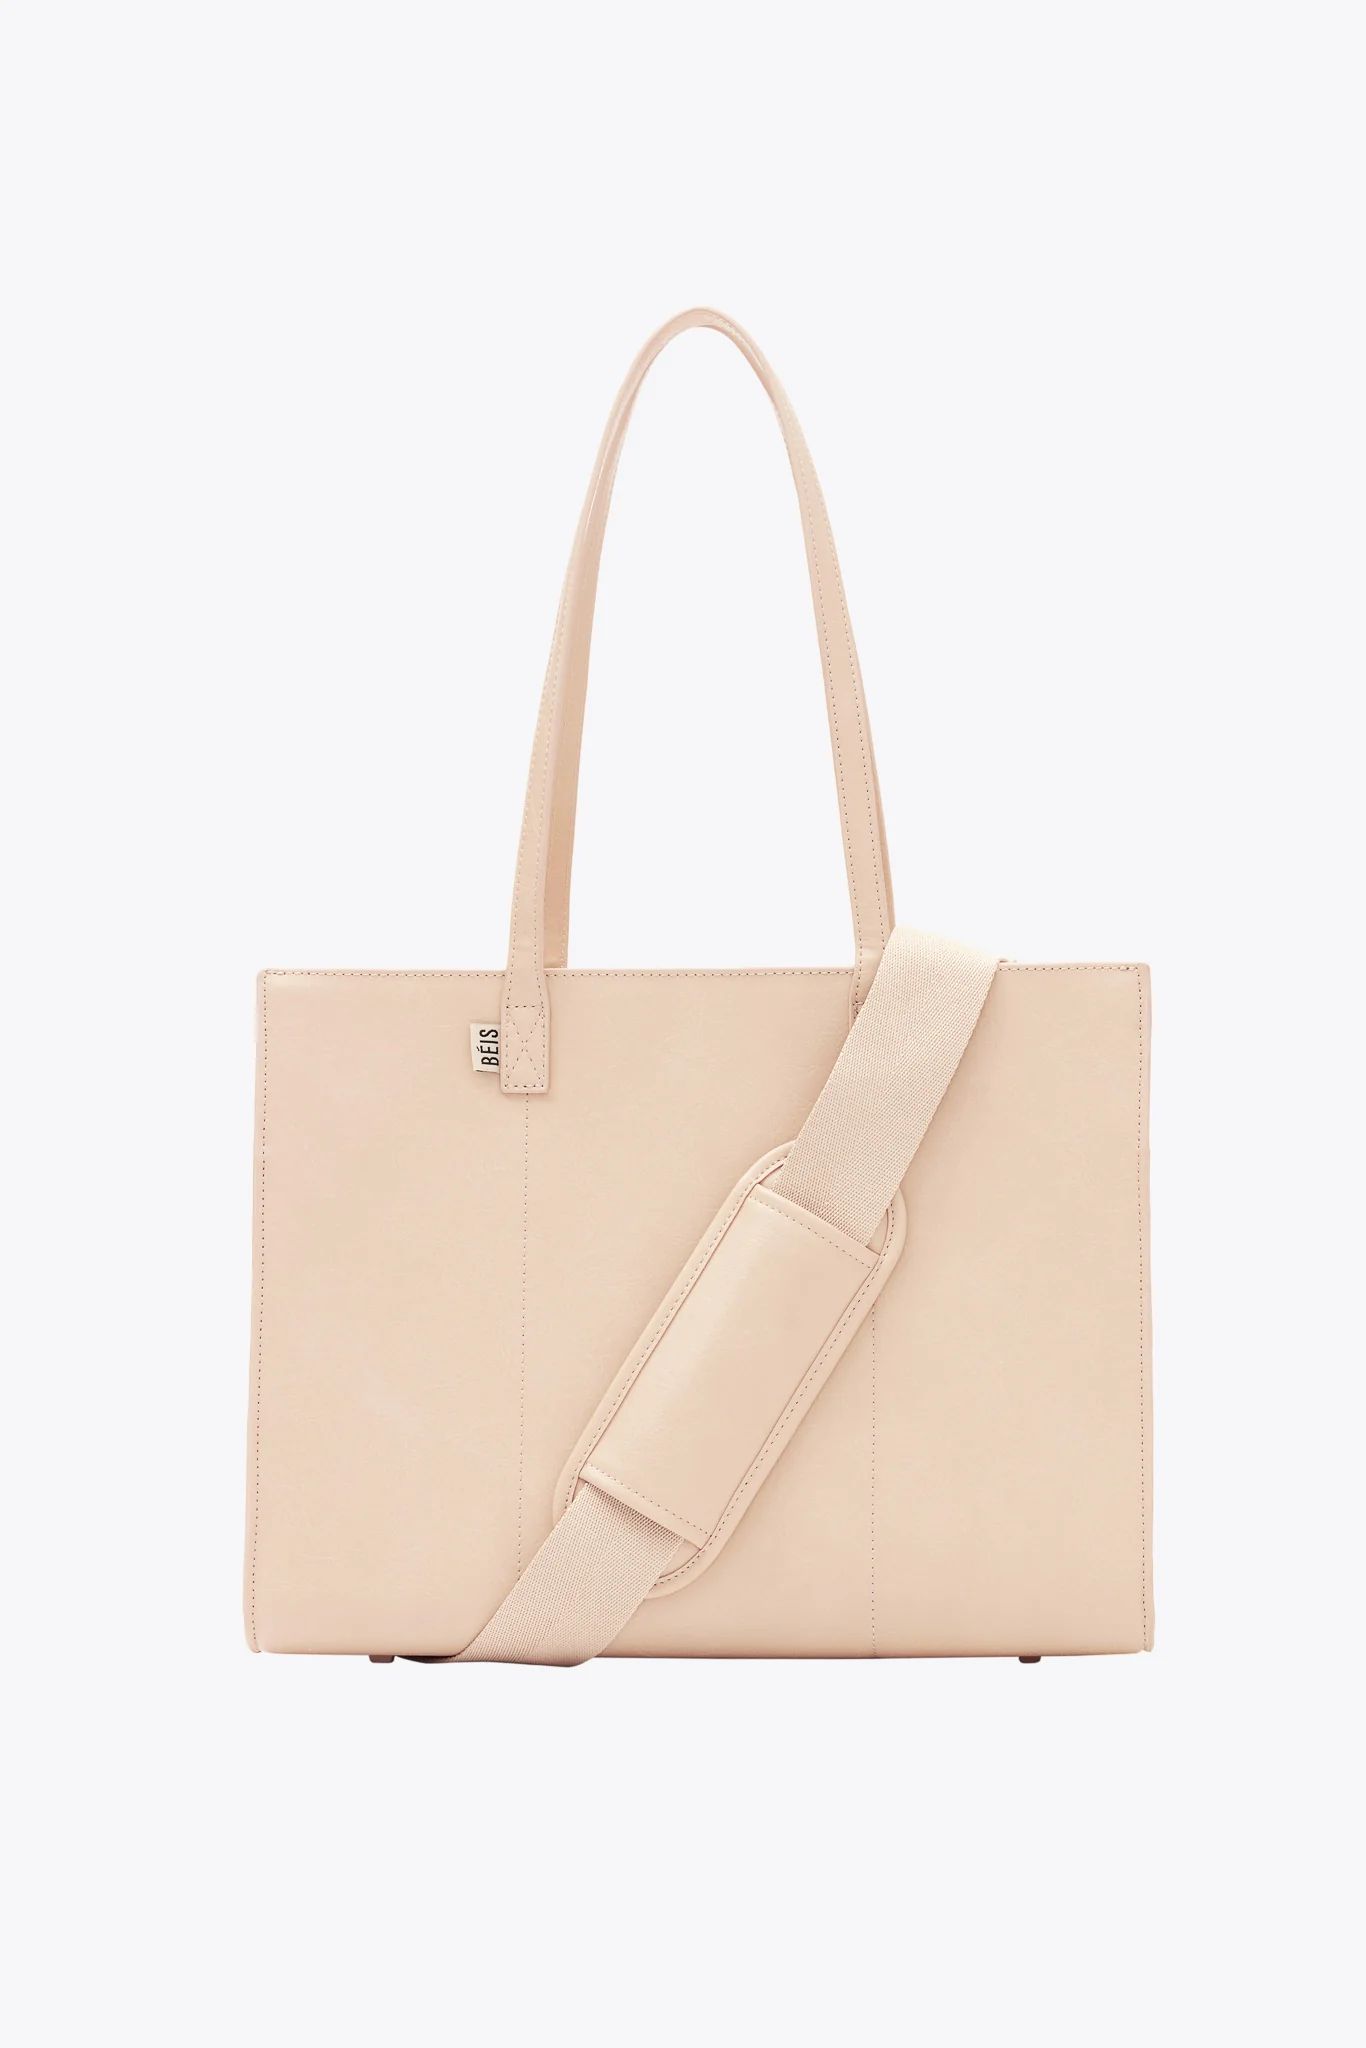 BÉIS 'The Work Tote' in Beige - Beige Small Work Bag For Women & Laptop Tote Bag | BÉIS Travel